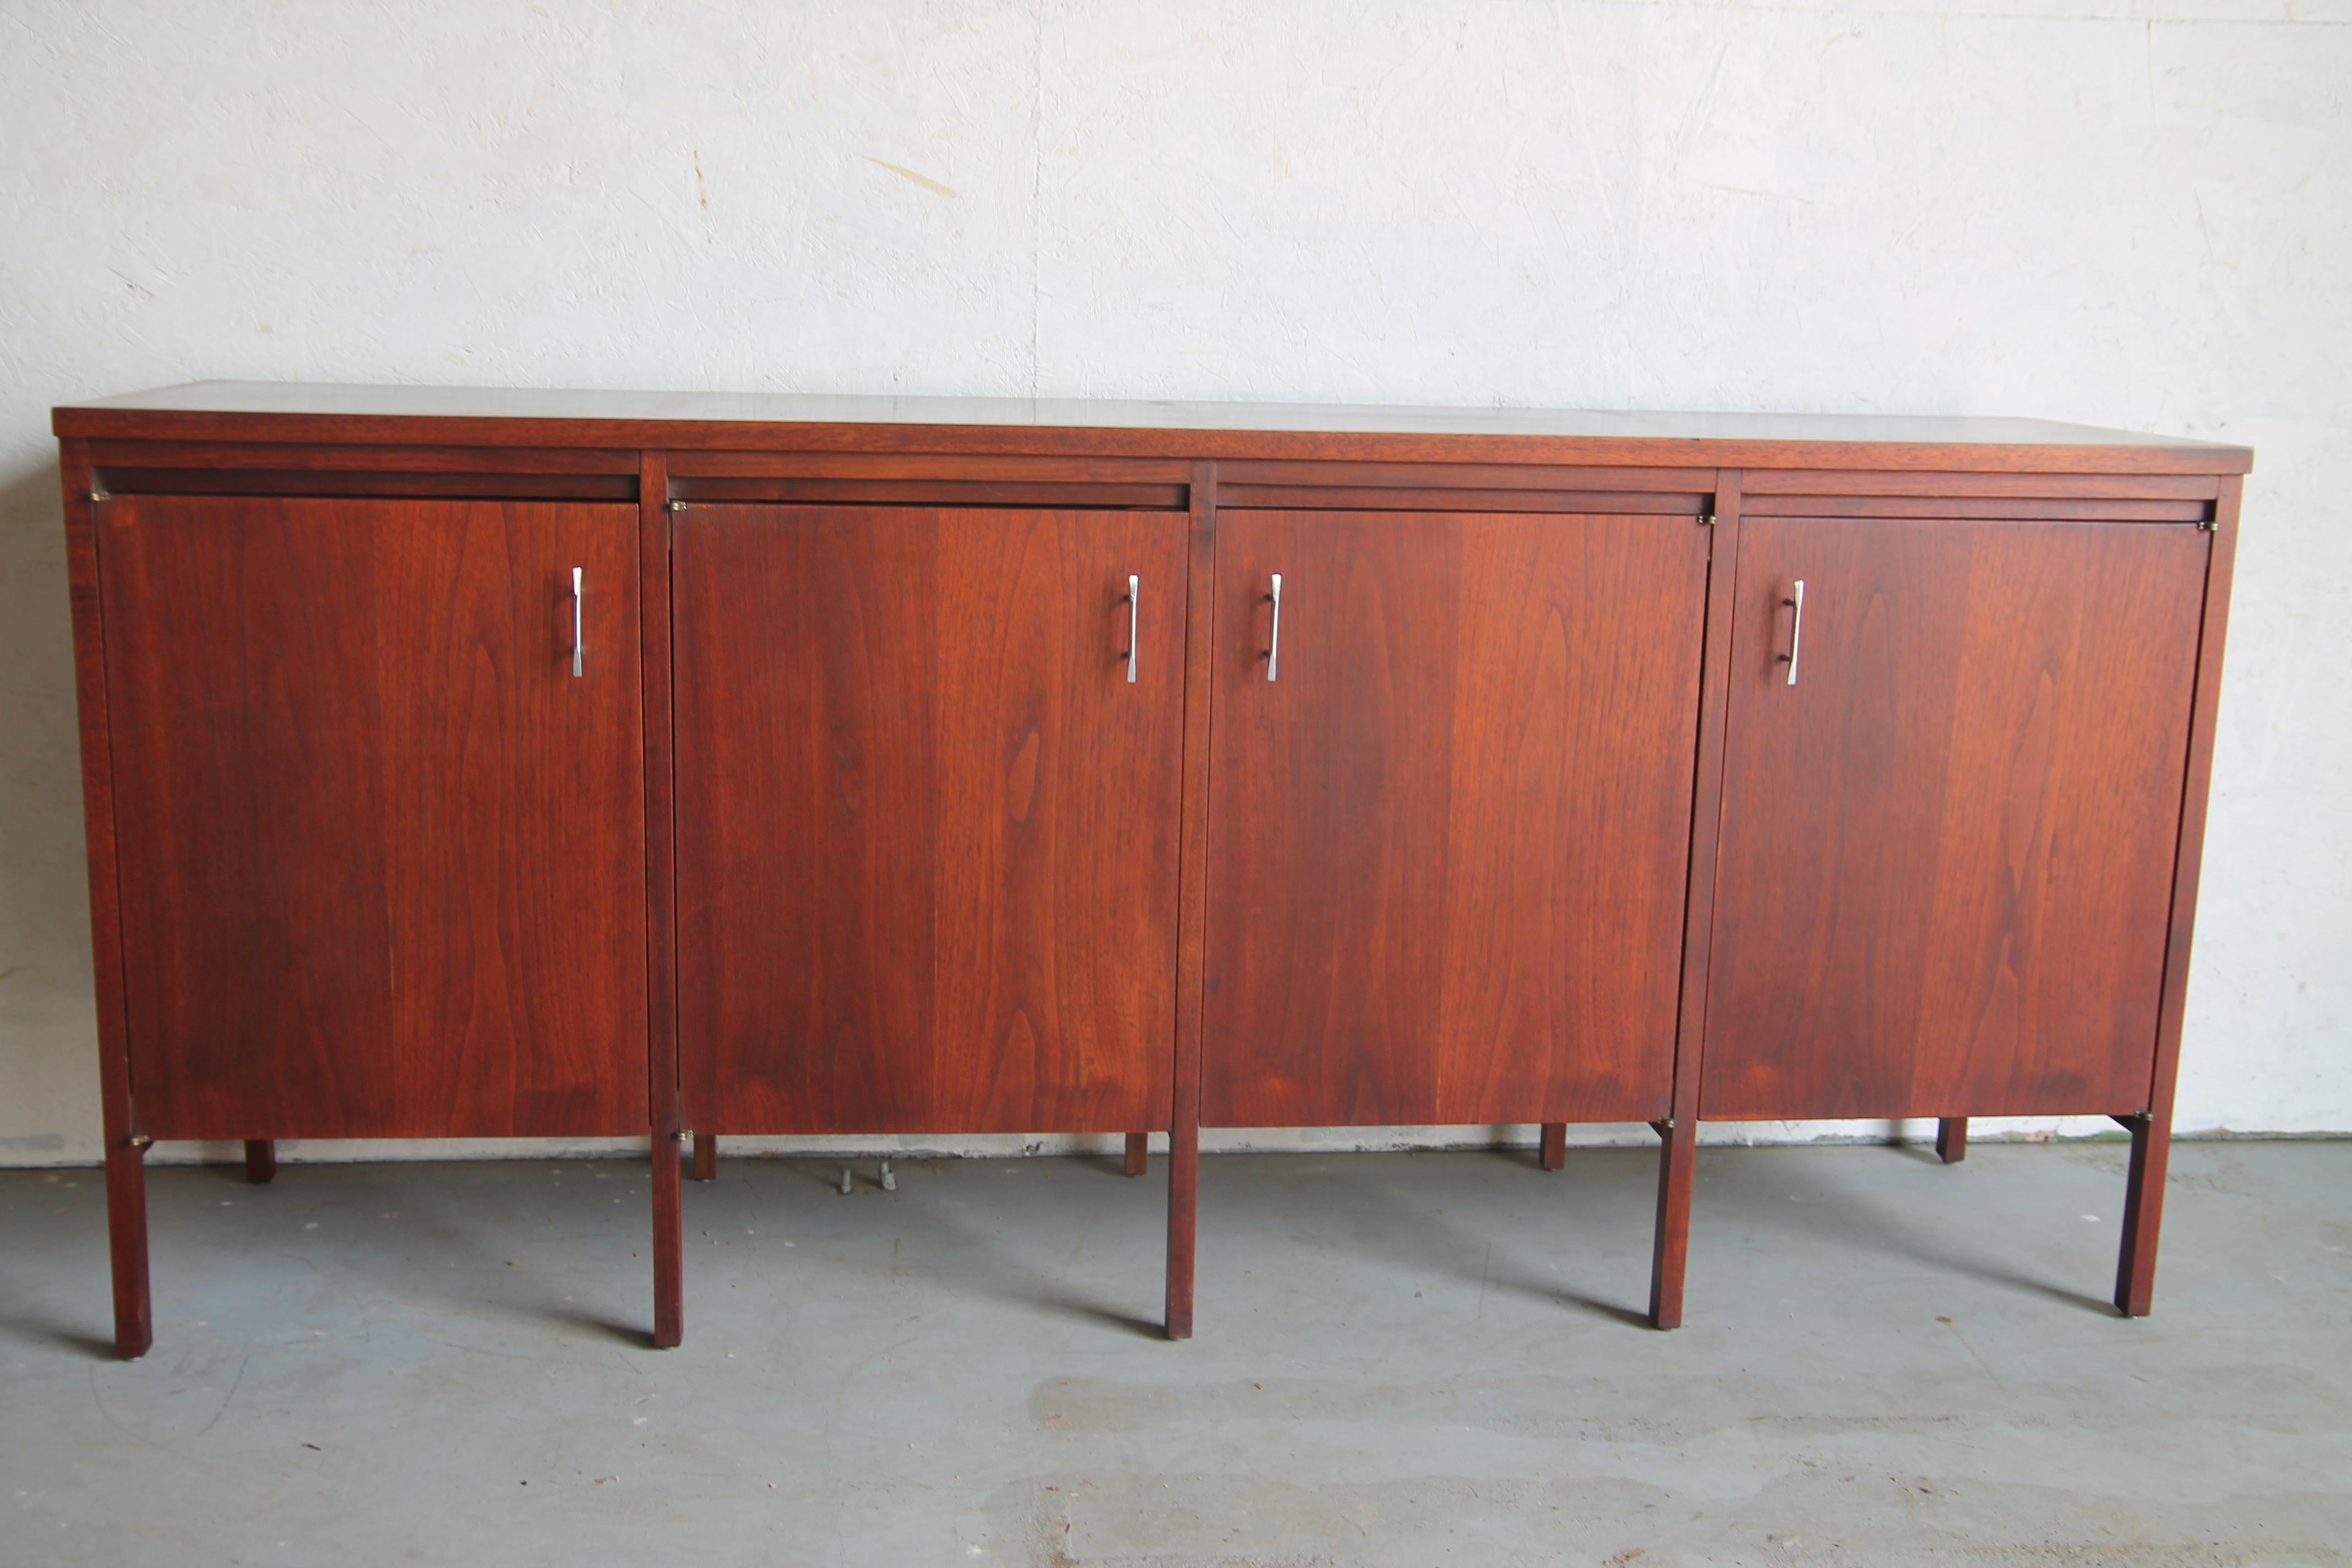 Wonderful Paul McCobb designed credenza with upper cabinet for Lane. These two pieces can be used together or separately. McCobb worked for Lane from 1961-1965 and designed 3 lines for them. This is part of the Delineator line. This rarely come to